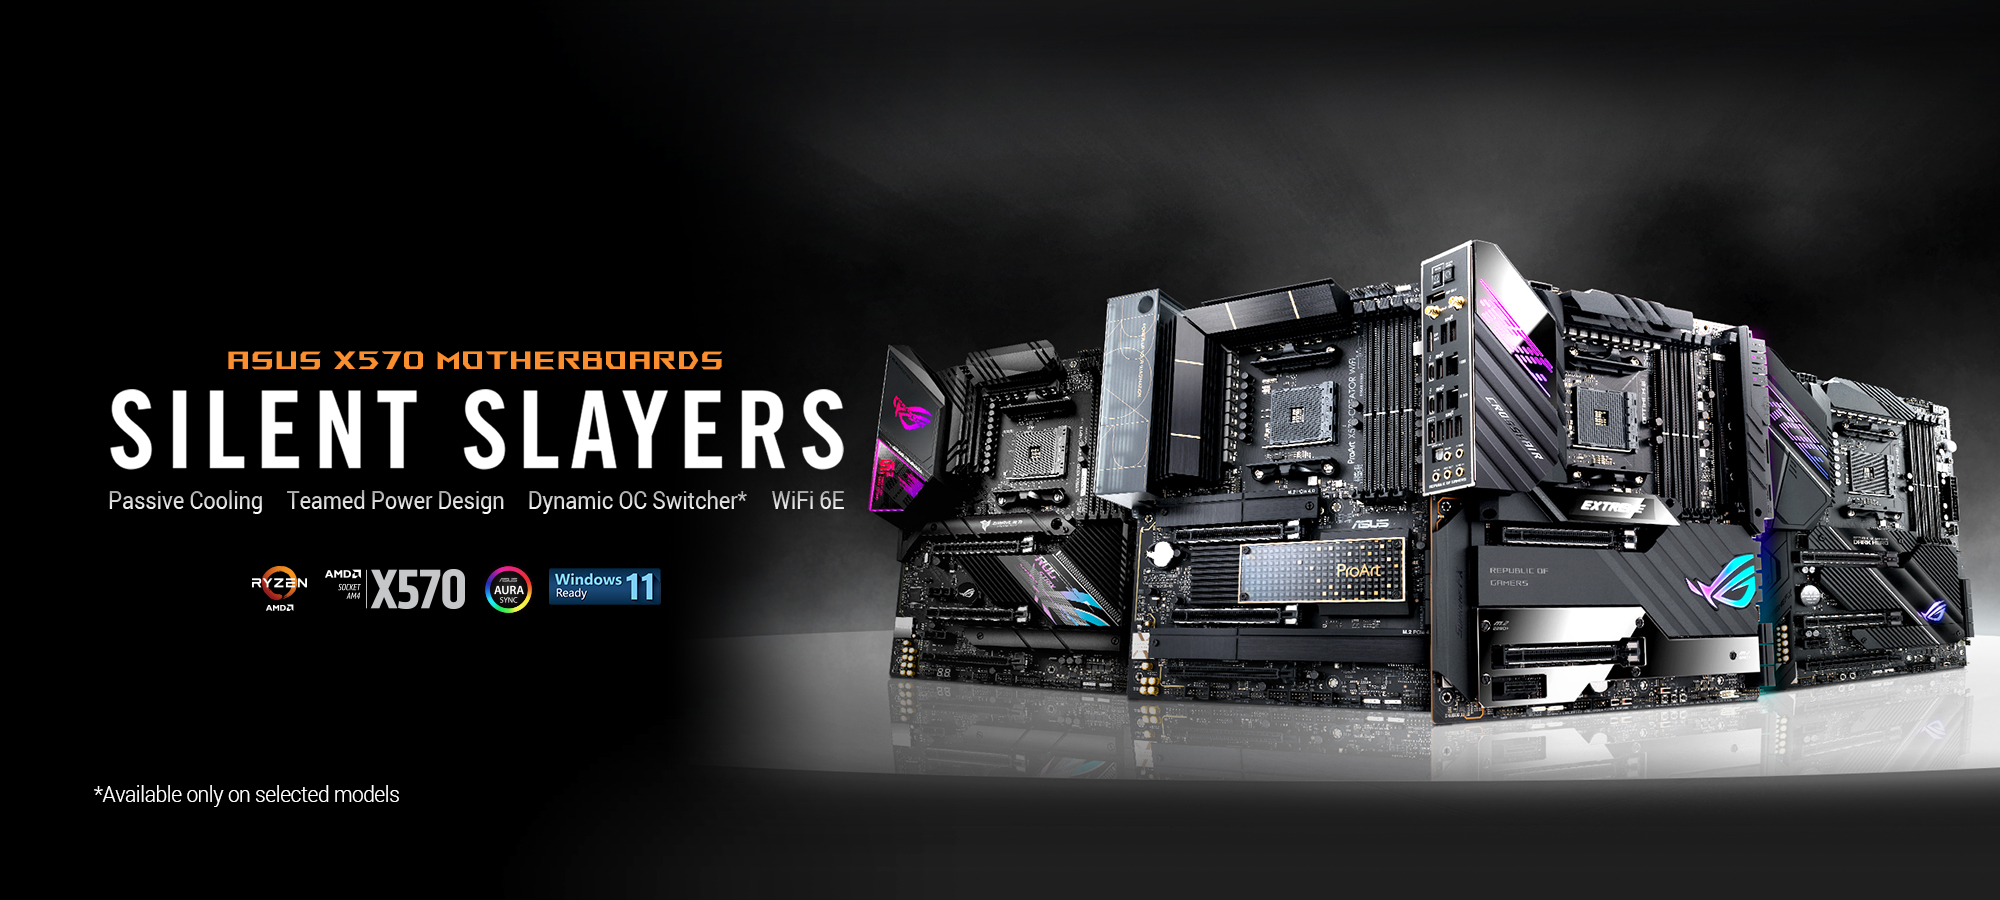 asus motherboards